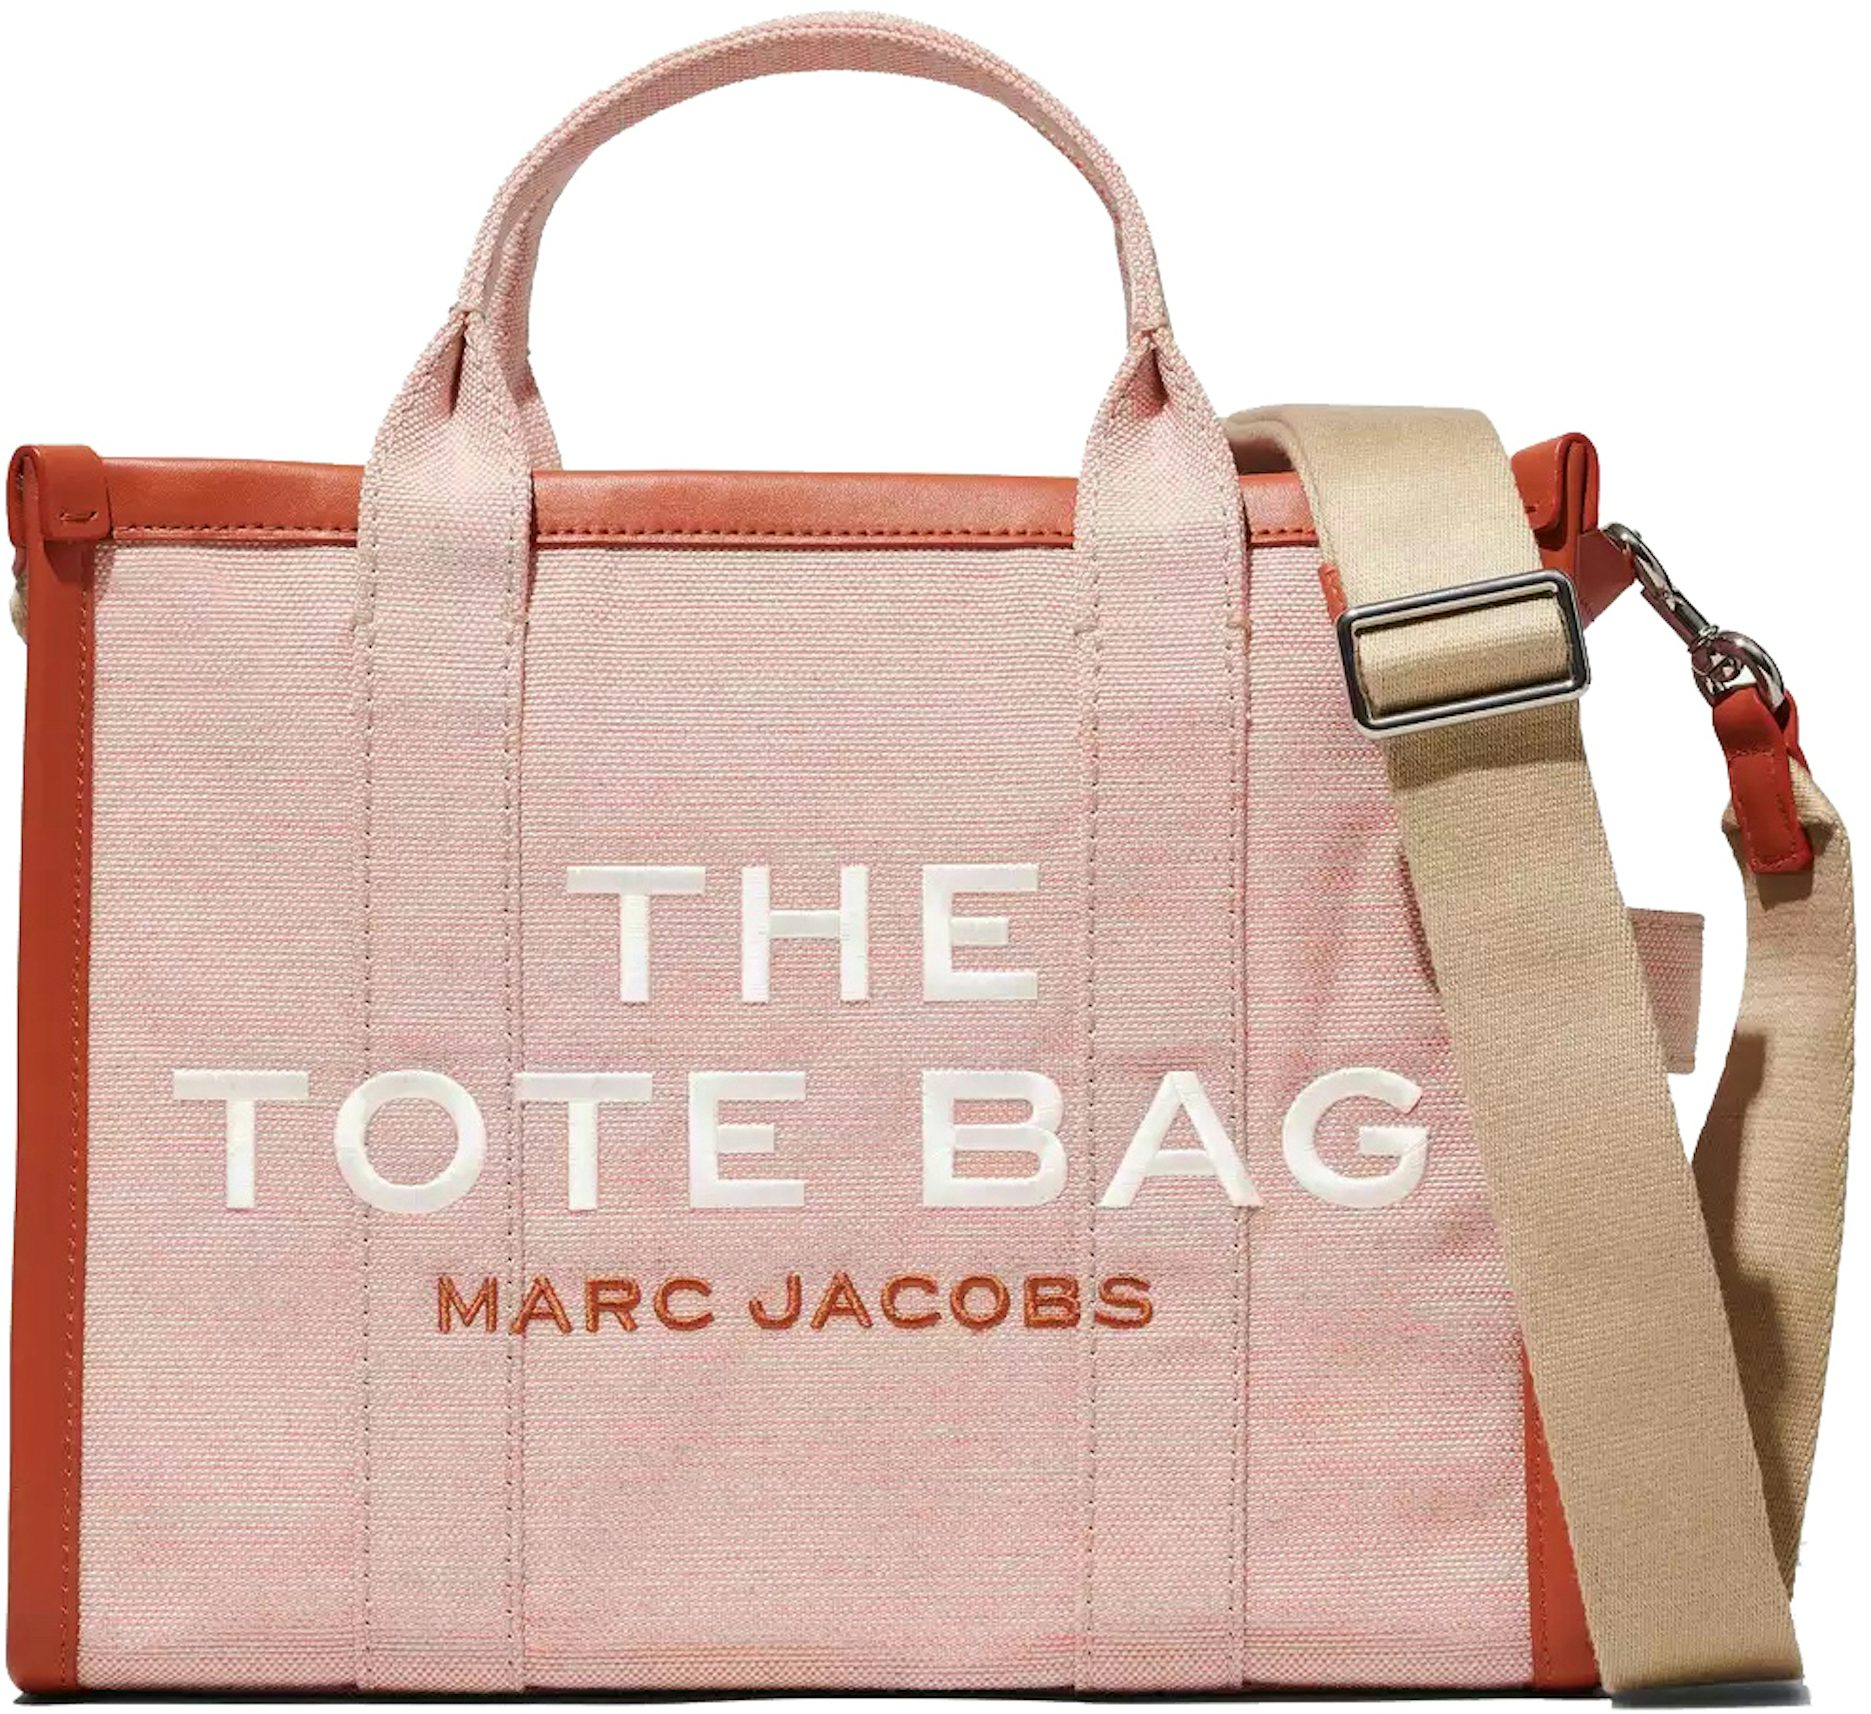 Marc Jacobs Pink Leather Medium 'The Tote Bag' Tote